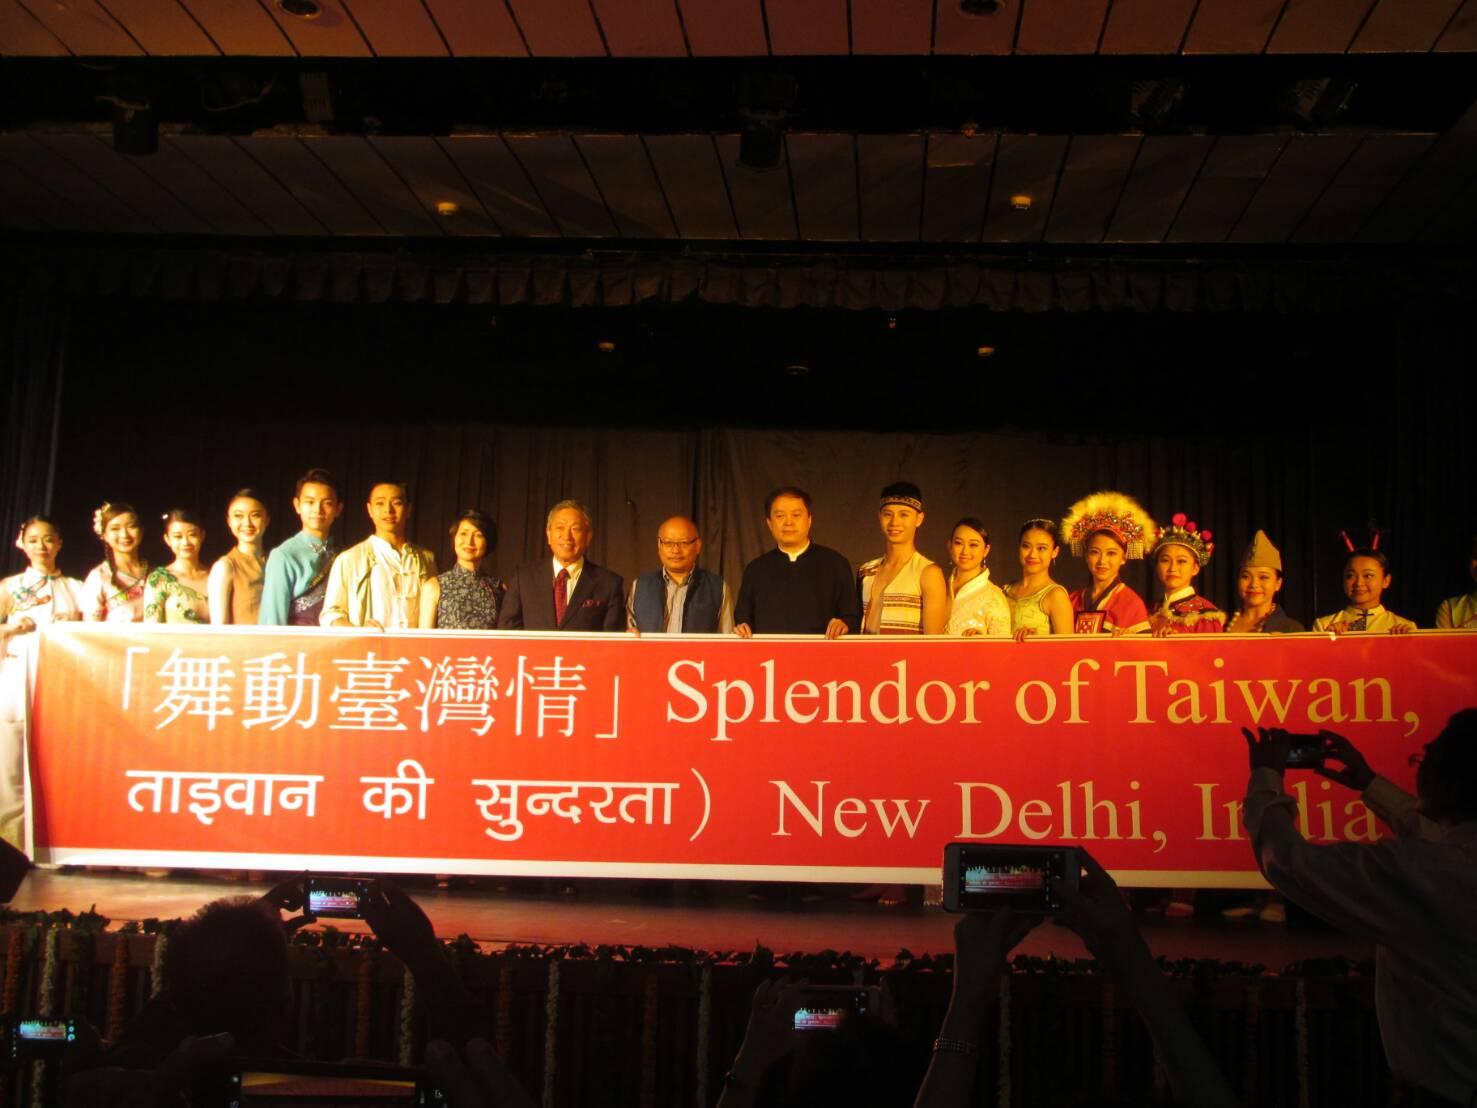 Amb. Tien Chung-Kwang (8th, left) photographed with Shri Vanlalhuma (center), Deputy Director General, Indian Council for Cultural Relations (ICCR), Dr. Chen Zhi-cheng (8th, right), President of National Taiwan University of Arts (NTUA) as well as Da-Guan Dance Theater members before opening the cultural program ‘Splendor of Taiwan’ at Azad Bhawan Auditorium, ICCR, New Delhi on July 23, 2017.